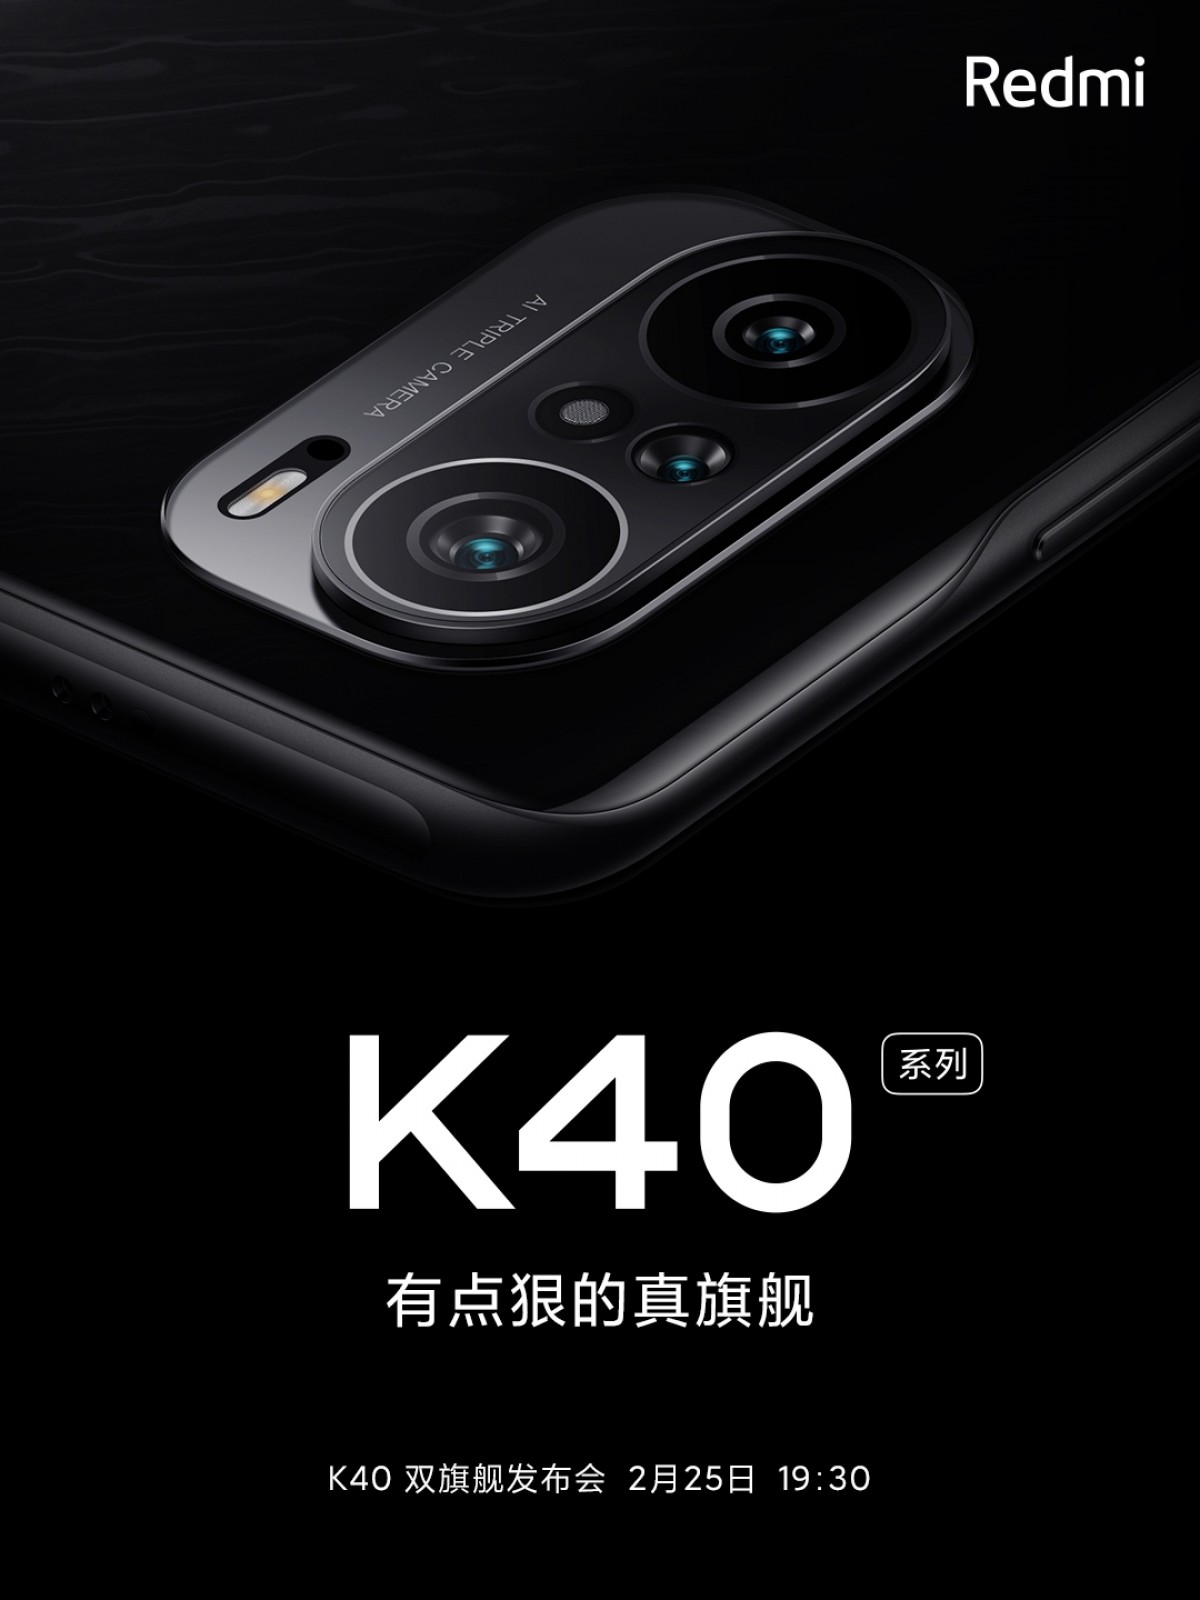 Redmi K40 will have a triple camera, official poster confirms